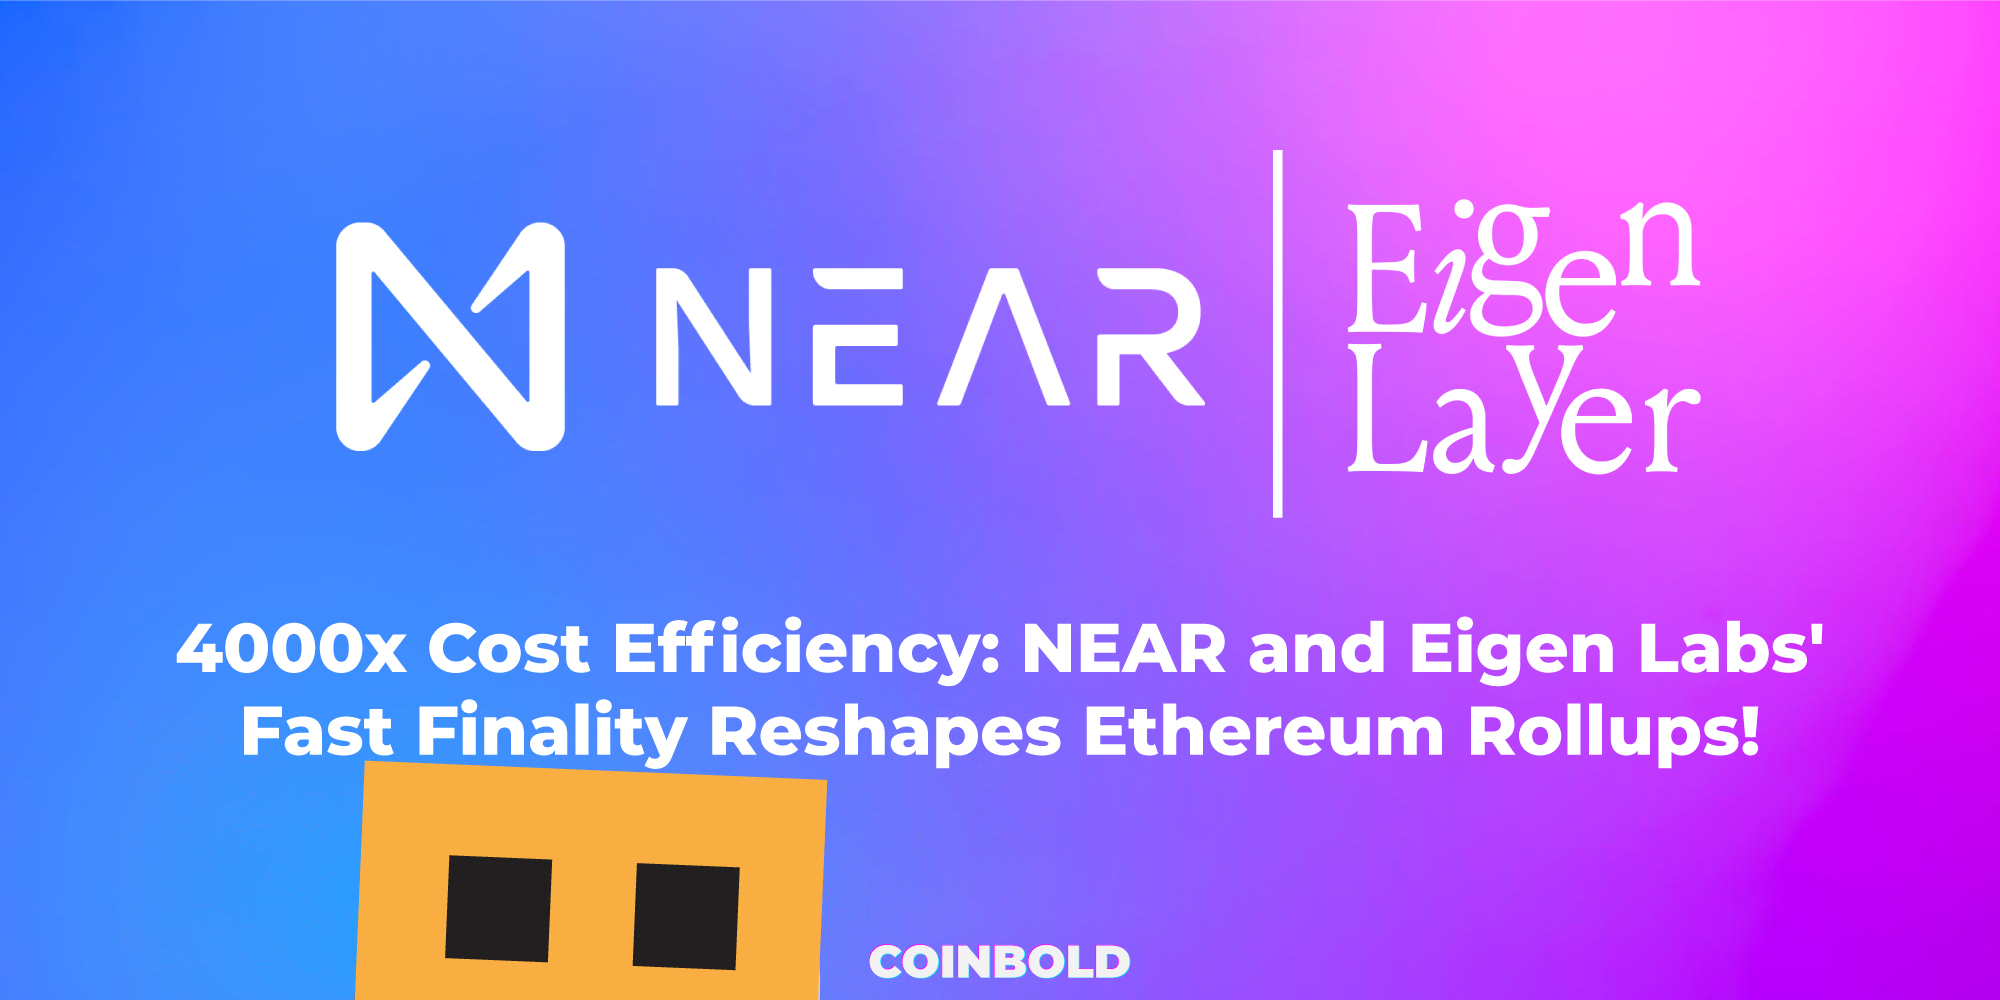 4000x Cost Efficiency NEAR and Eigen Labs' Fast Finality Reshapes Ethereum Rollups!